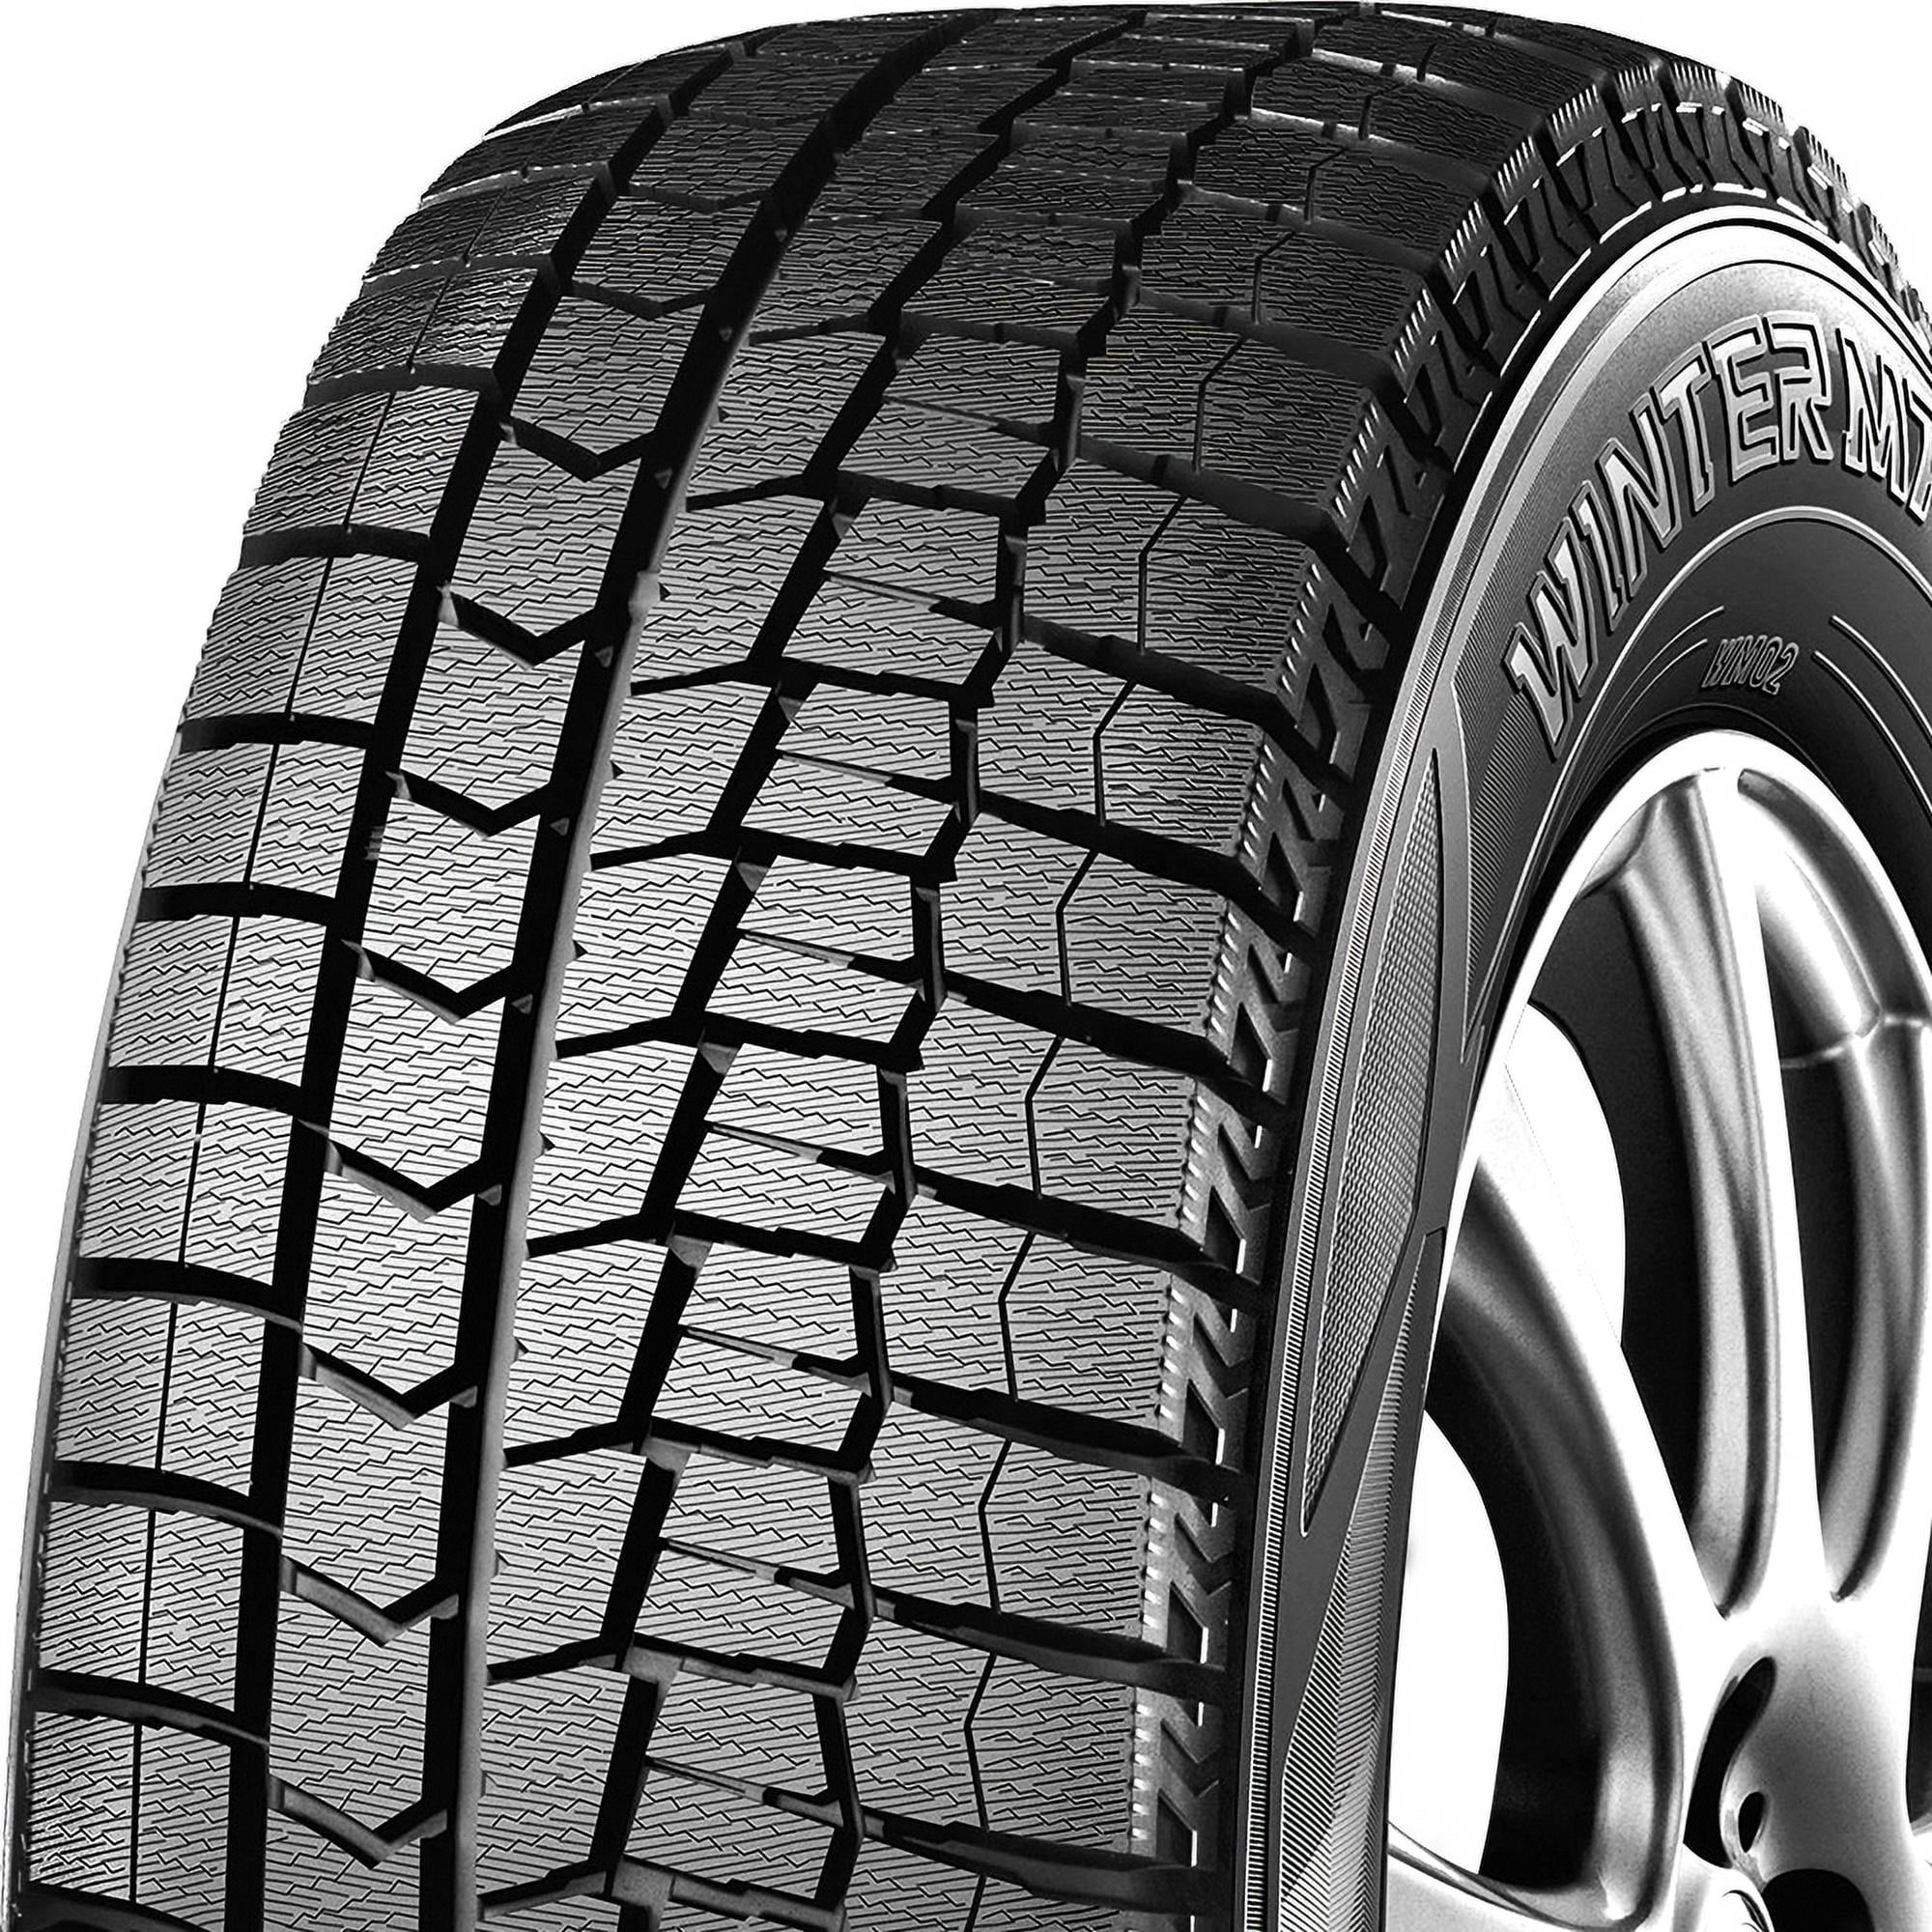 Snow Winter 2 Dunlop One Maxx (Studless) New Tire 82T 175/65R14